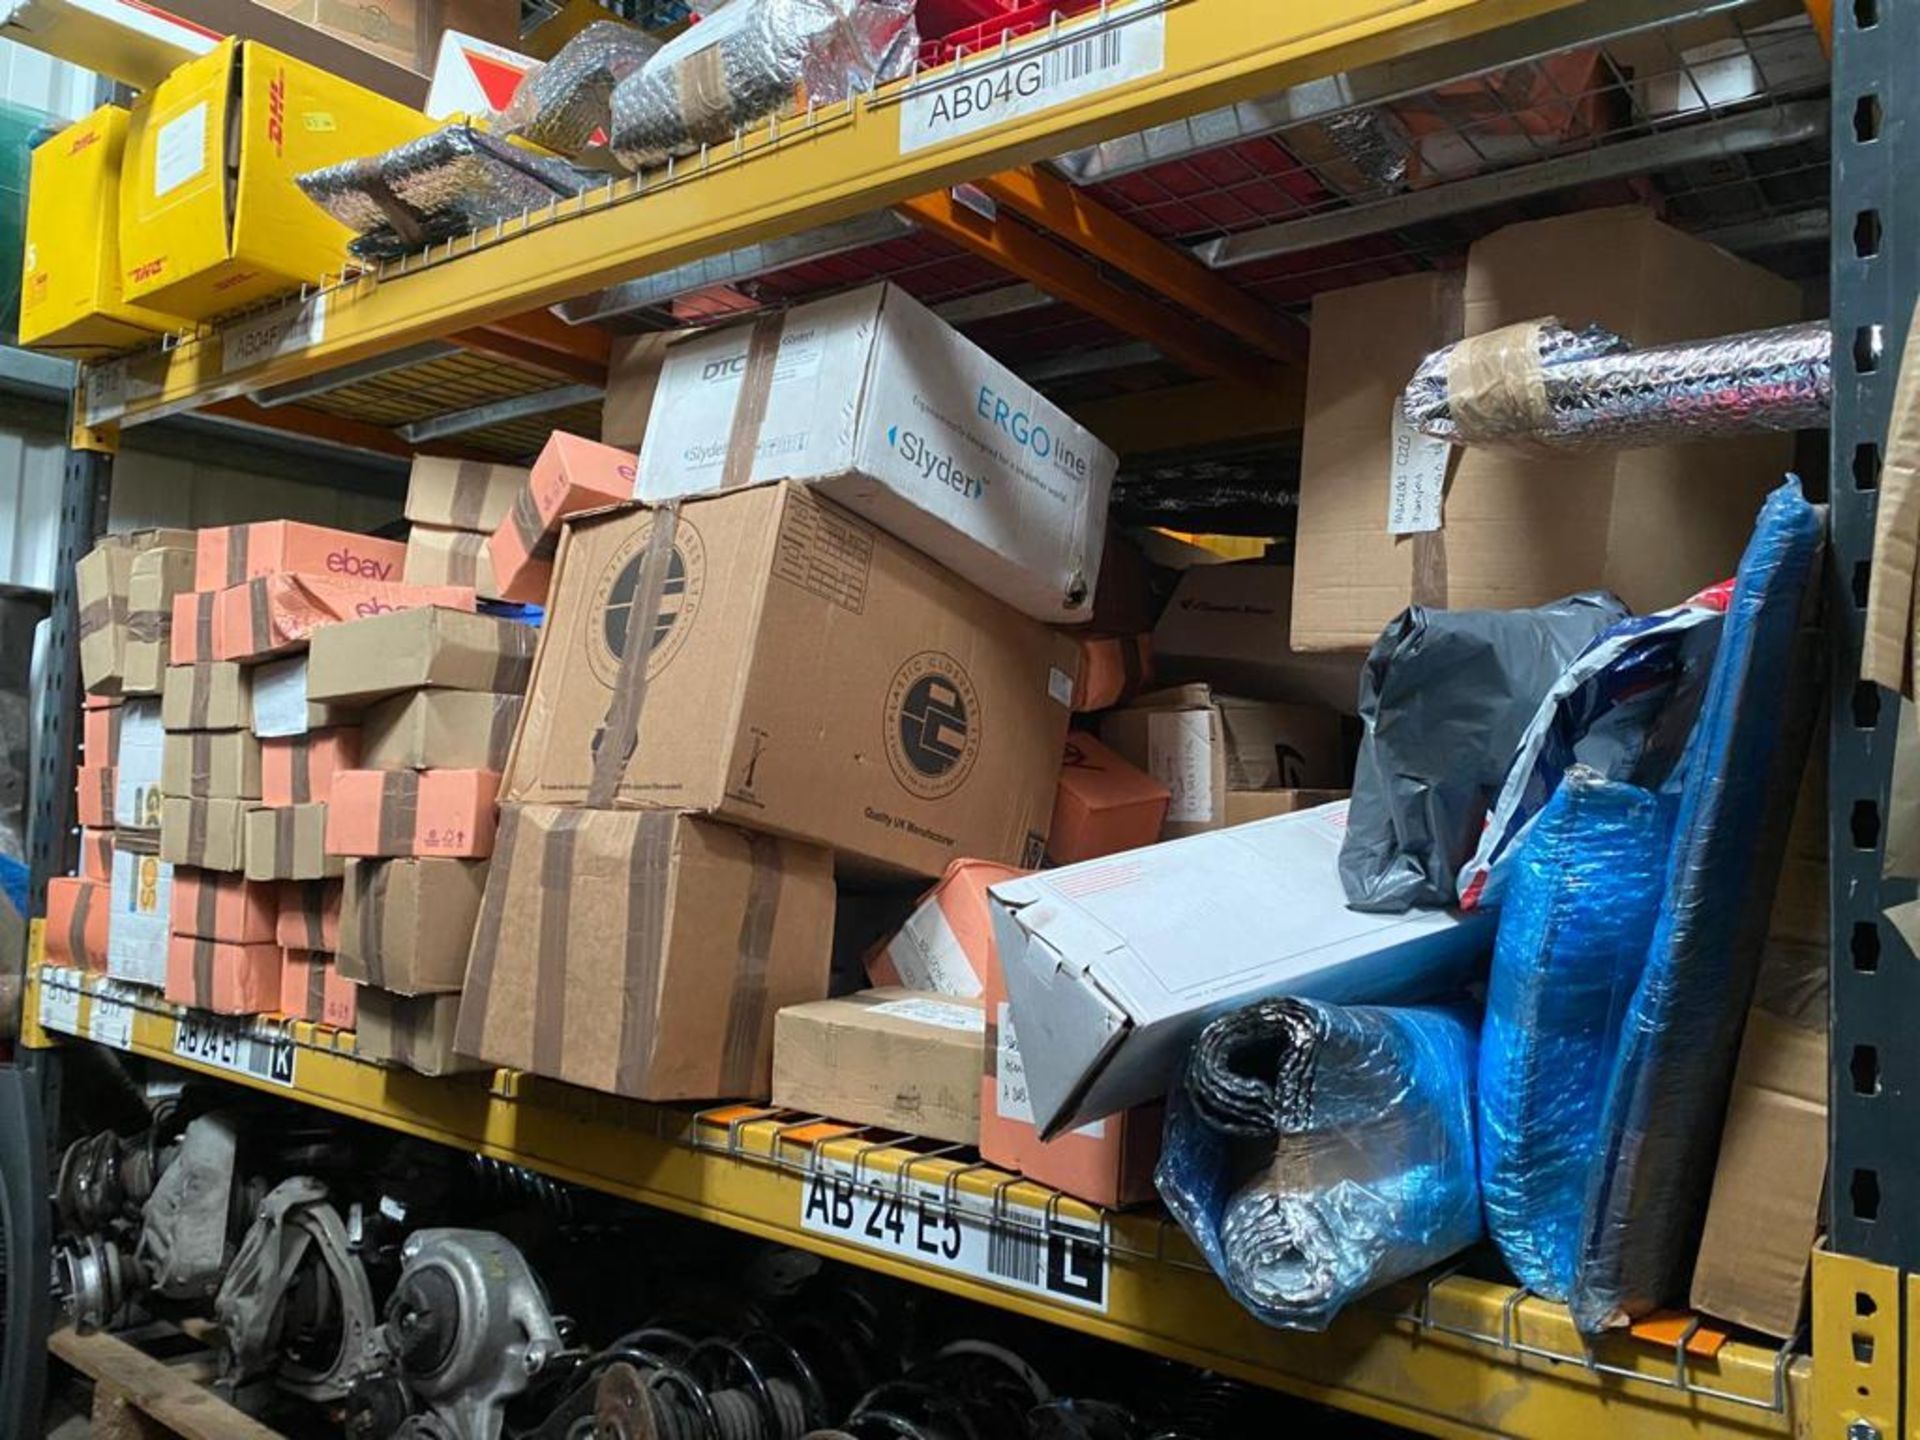 BULK ITEMS JOB LOT OF USED CAR PARTS - £350K ONGOING BUSINESS STOCK CLEARANCE FOR SALE! *NO VAT* - Image 59 of 95